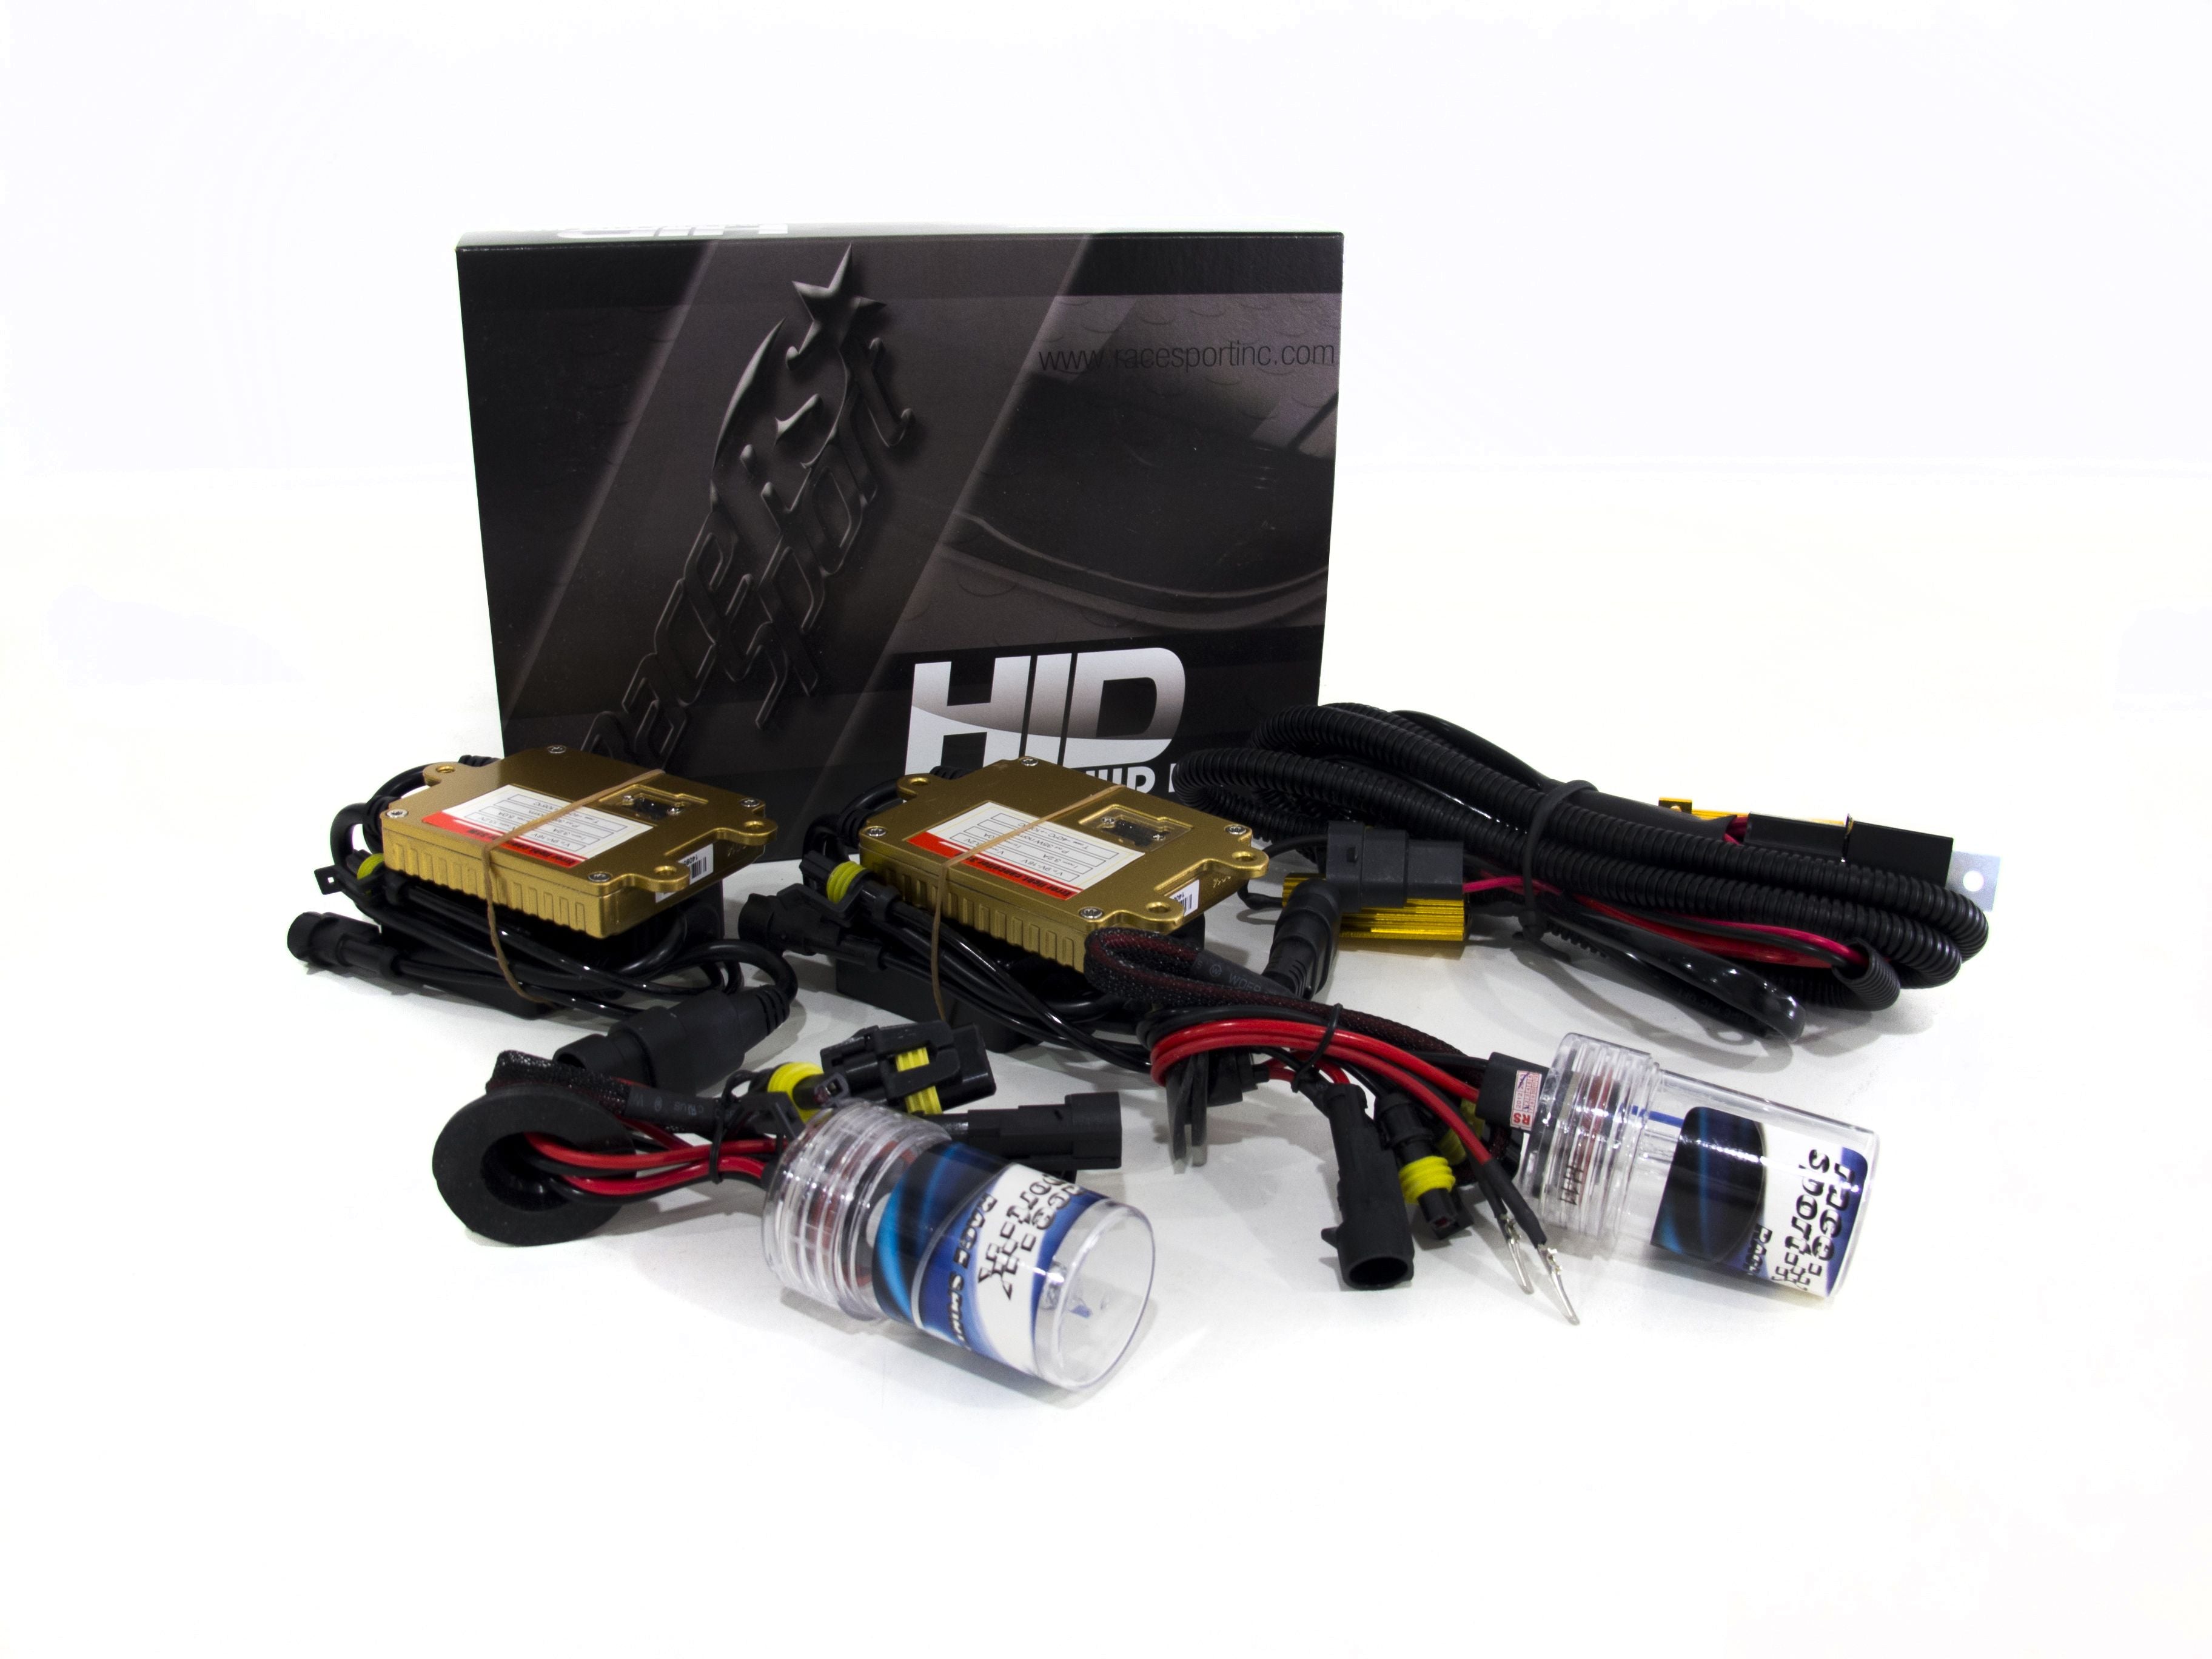 Race Sport Lighting 5202 6,000K GEN4 HID Conversion Kit with Canbus Functionality Includes Resistor Load Harness 5202-6K-G4-CANBUS-R